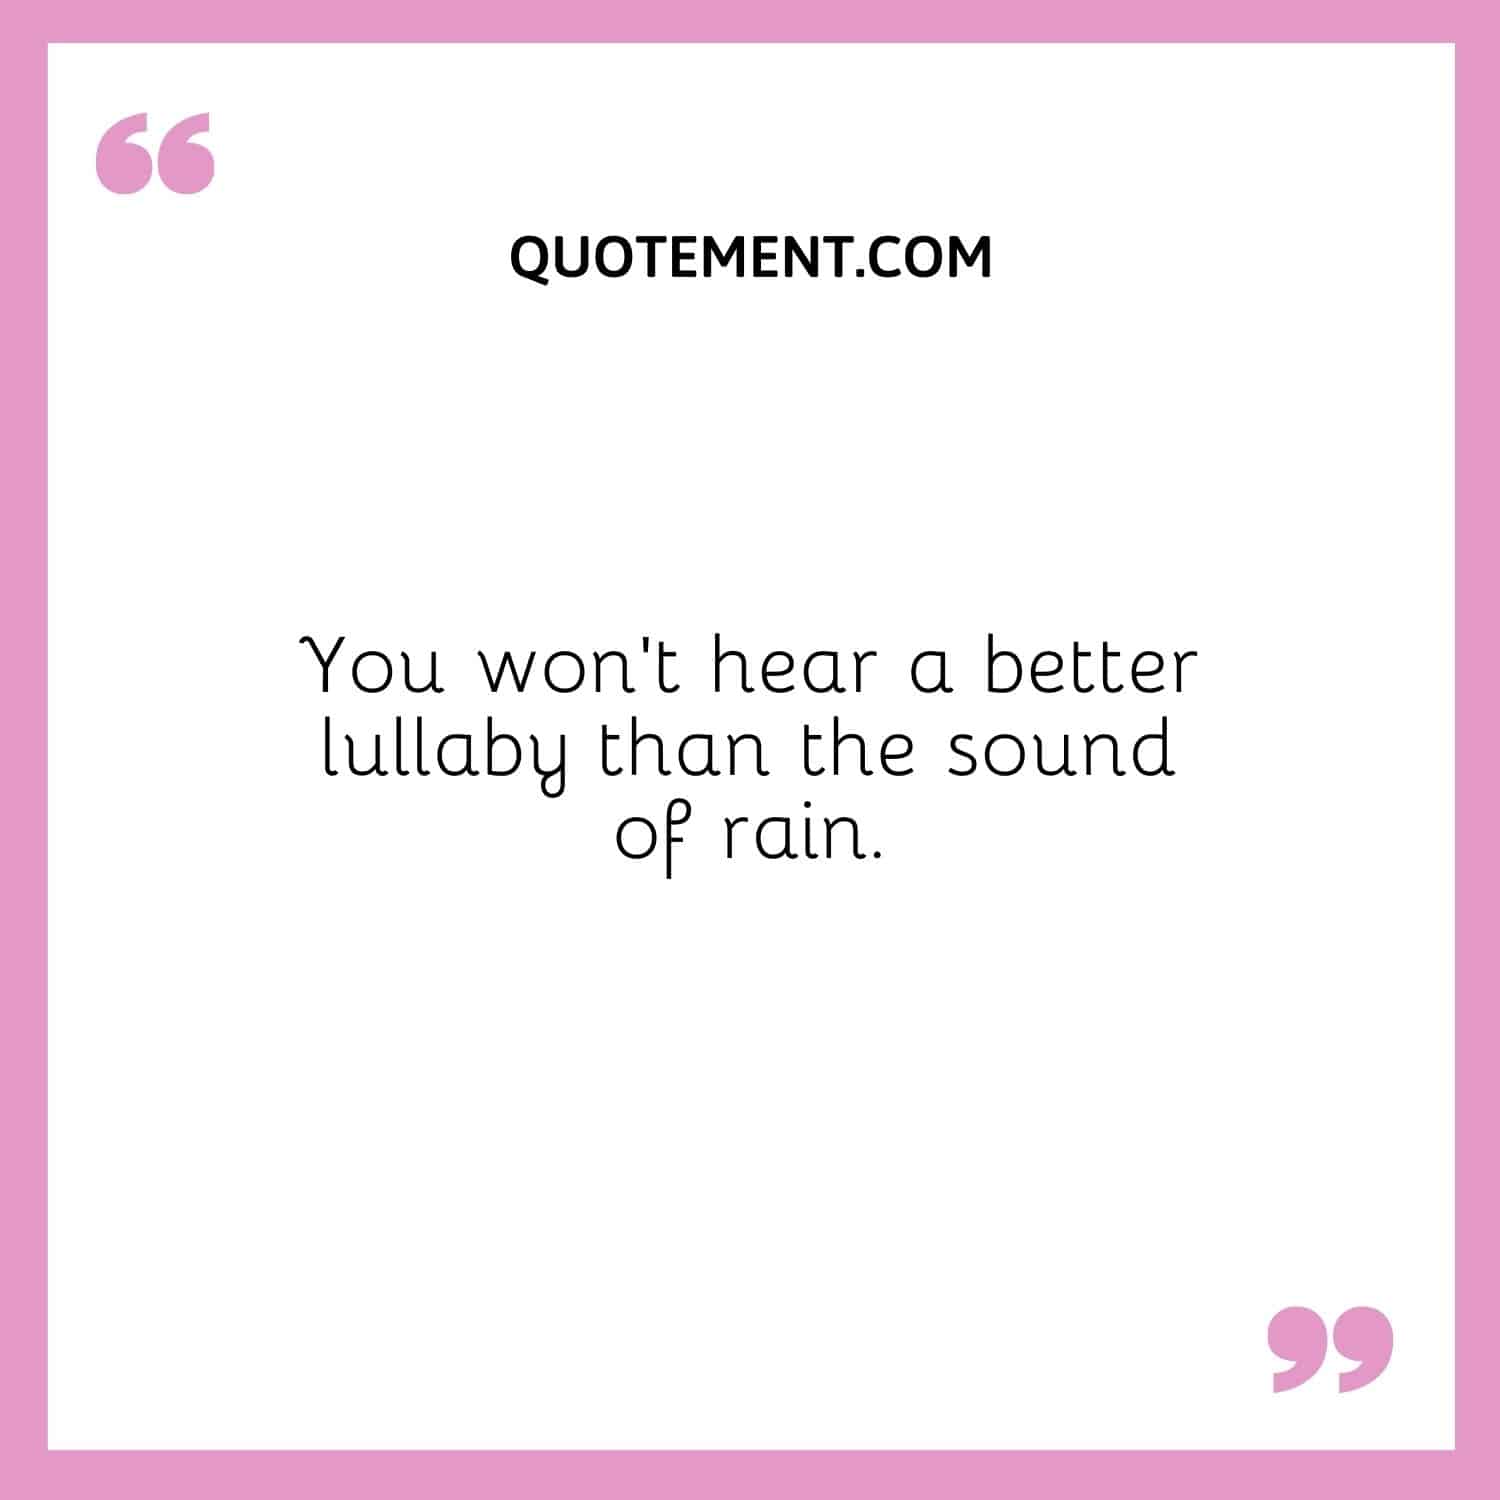 You won’t hear a better lullaby than the sound of rain.